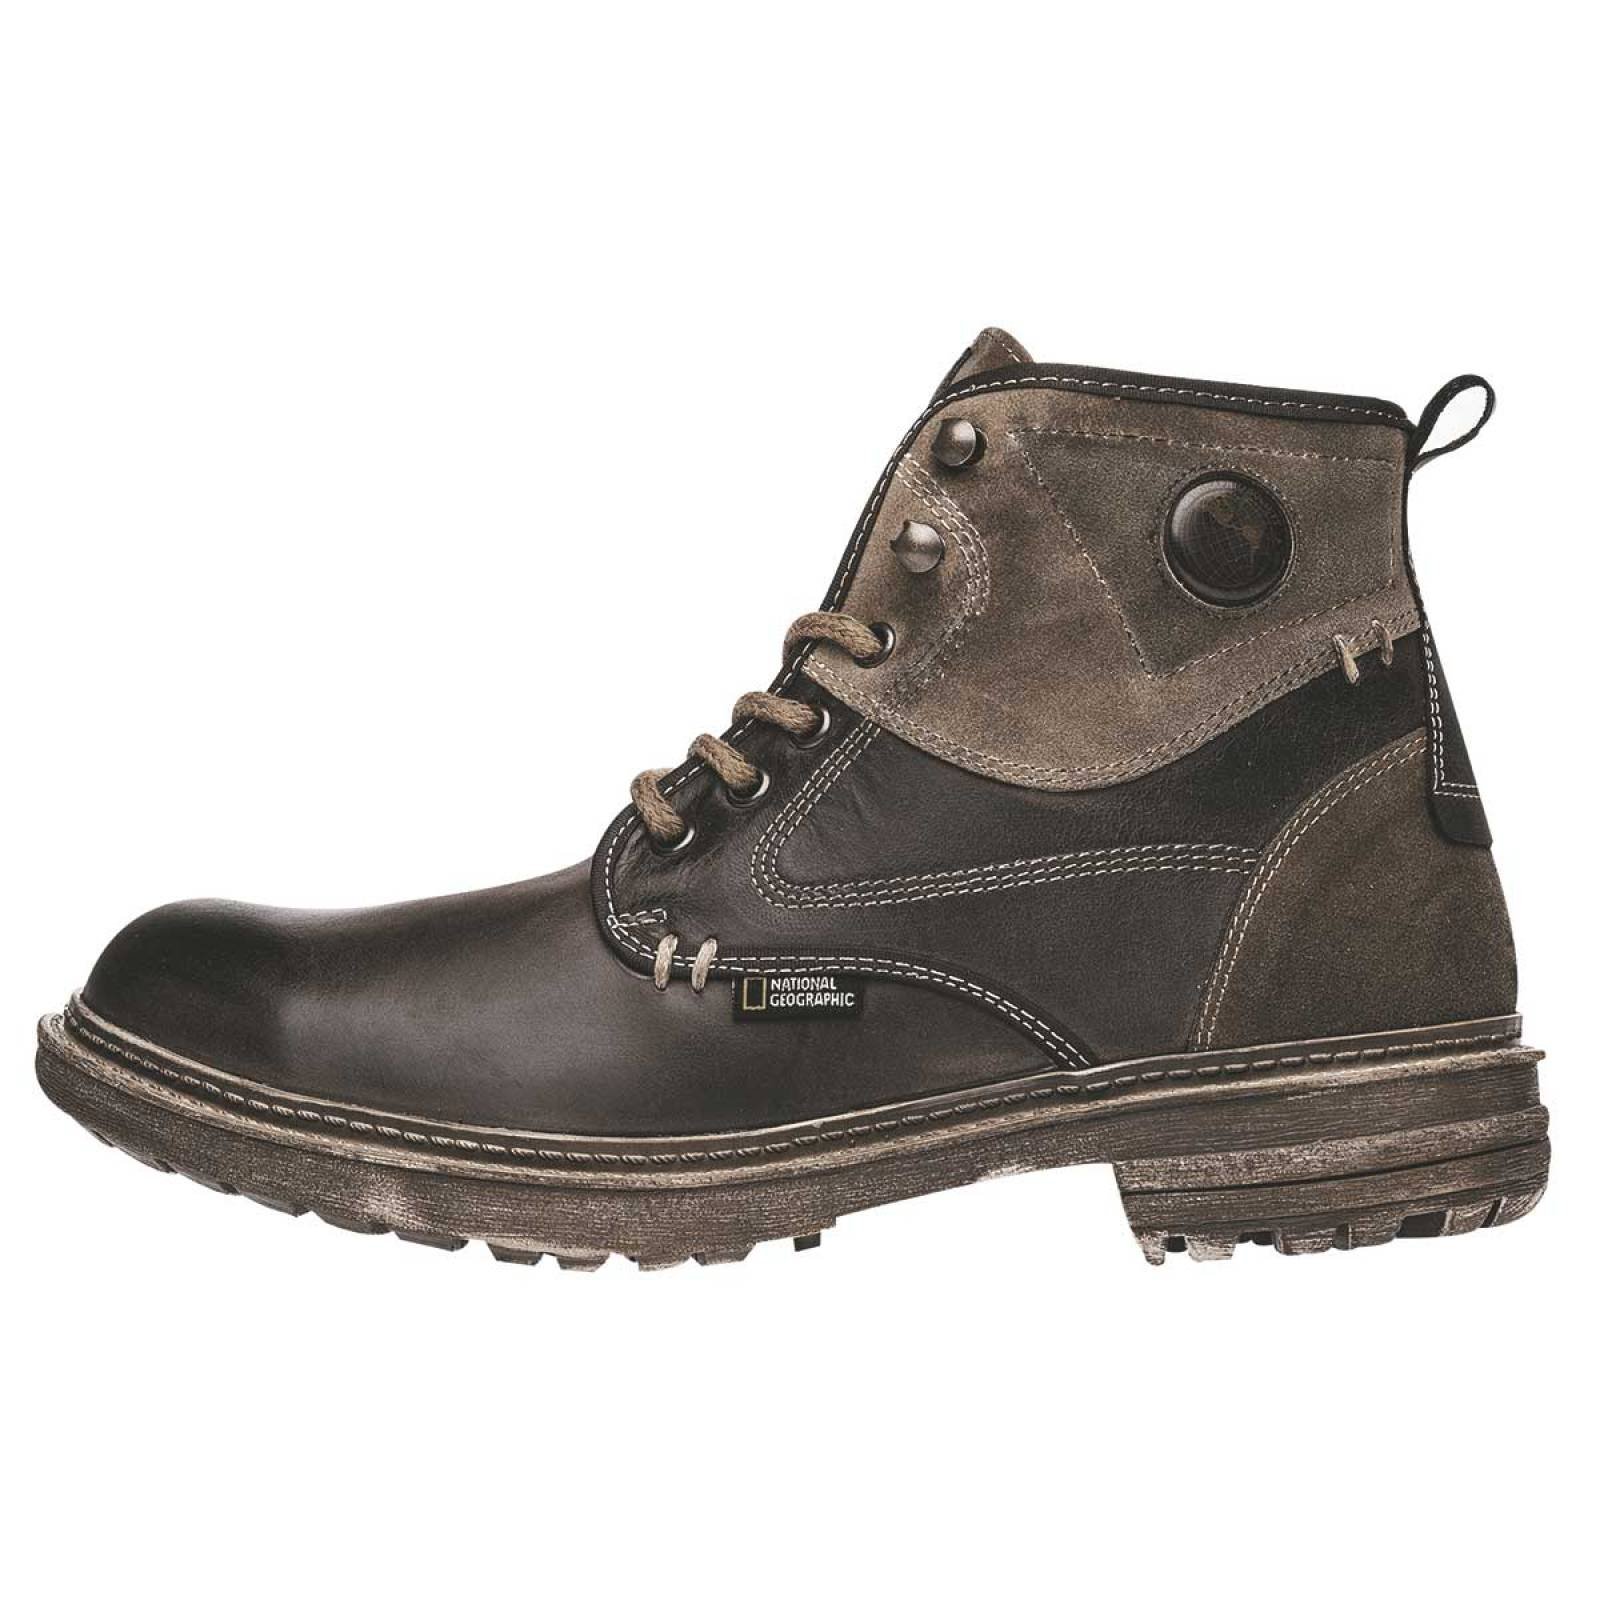 National geographic Bota y botin Hombre Cafe